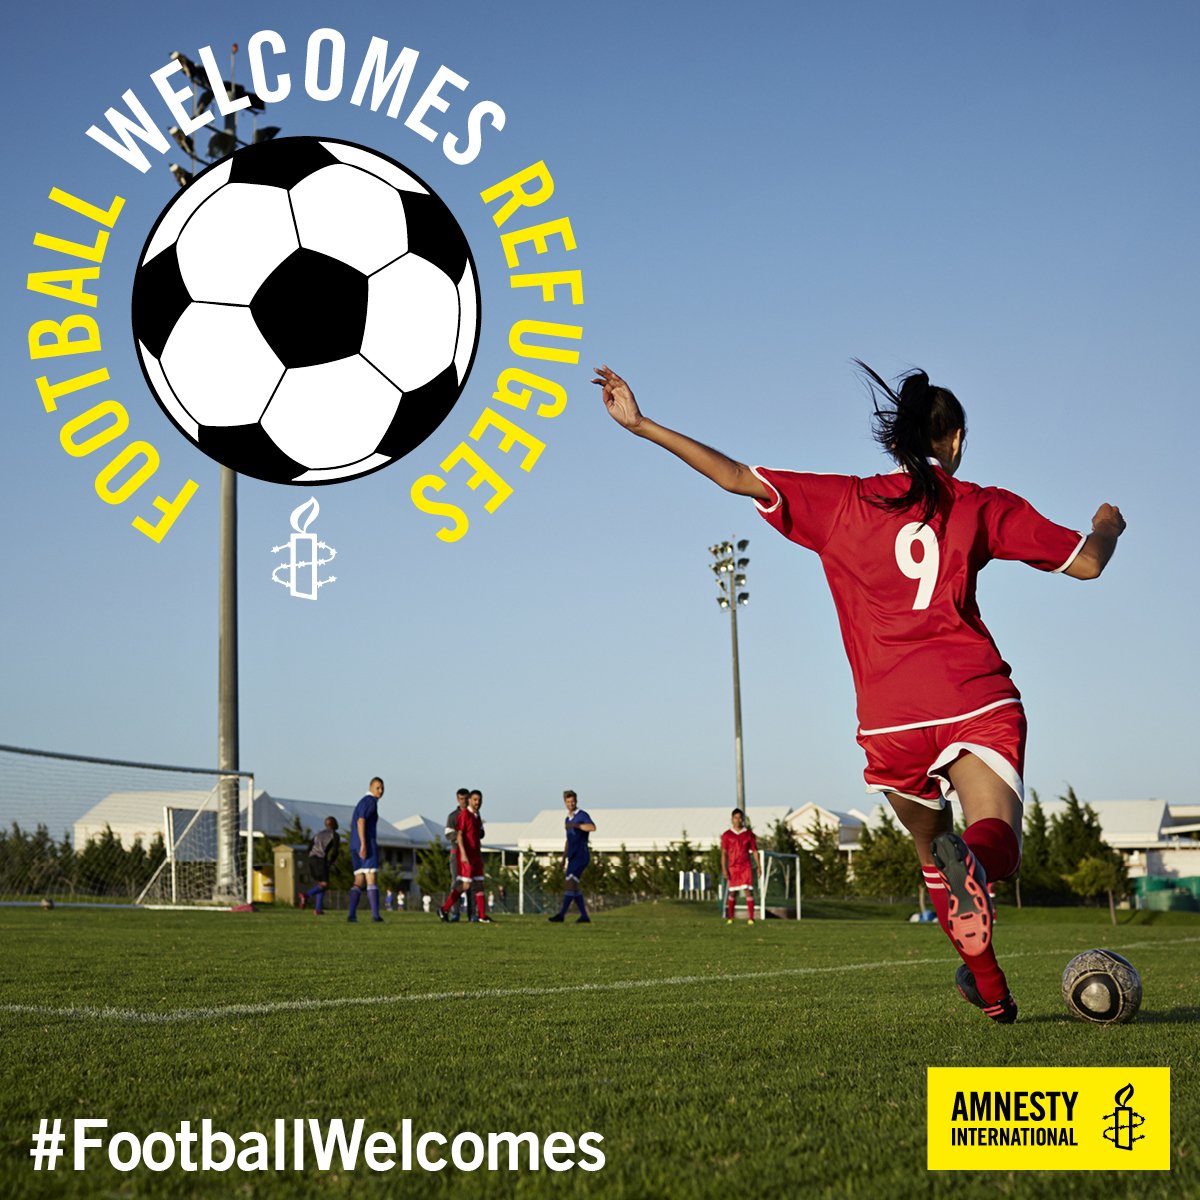 We're proud to be taking part in @AmnestyUK's #FootballWelcomes initiative this weekend. 18 refugees from our partner schools programme have been provided with tickets for today's #MUNCHE fixture at Old Trafford.

⚽ Find out more: amnesty.org.uk/football-welco…